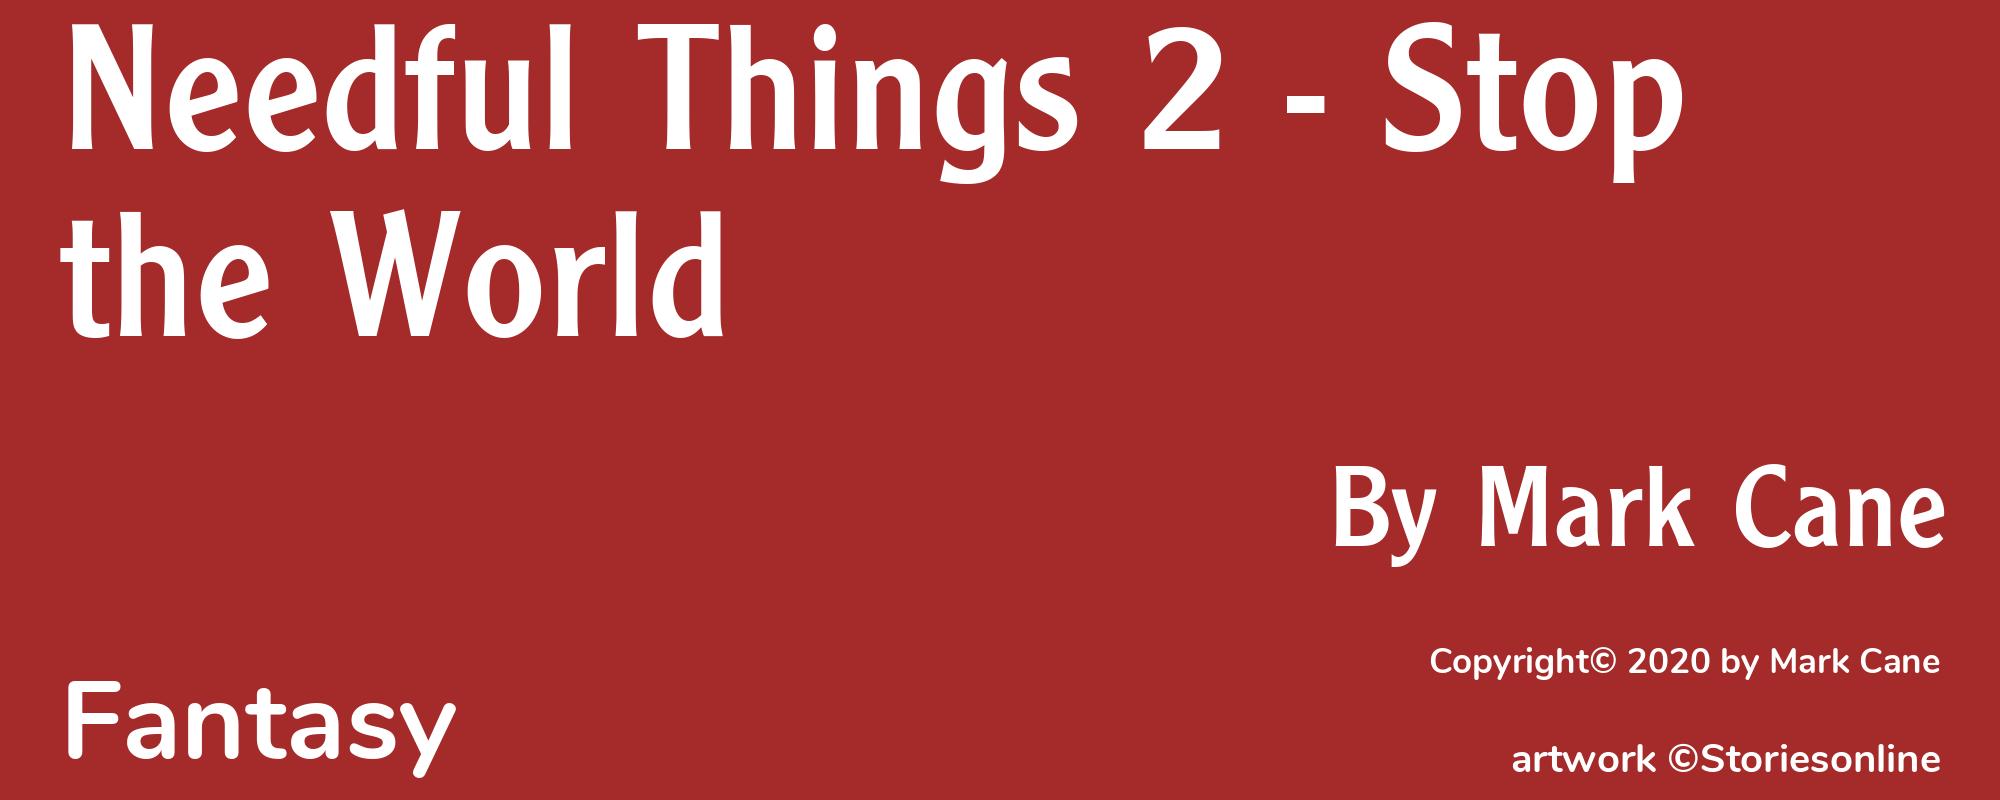 Needful Things 2 - Stop the World - Cover